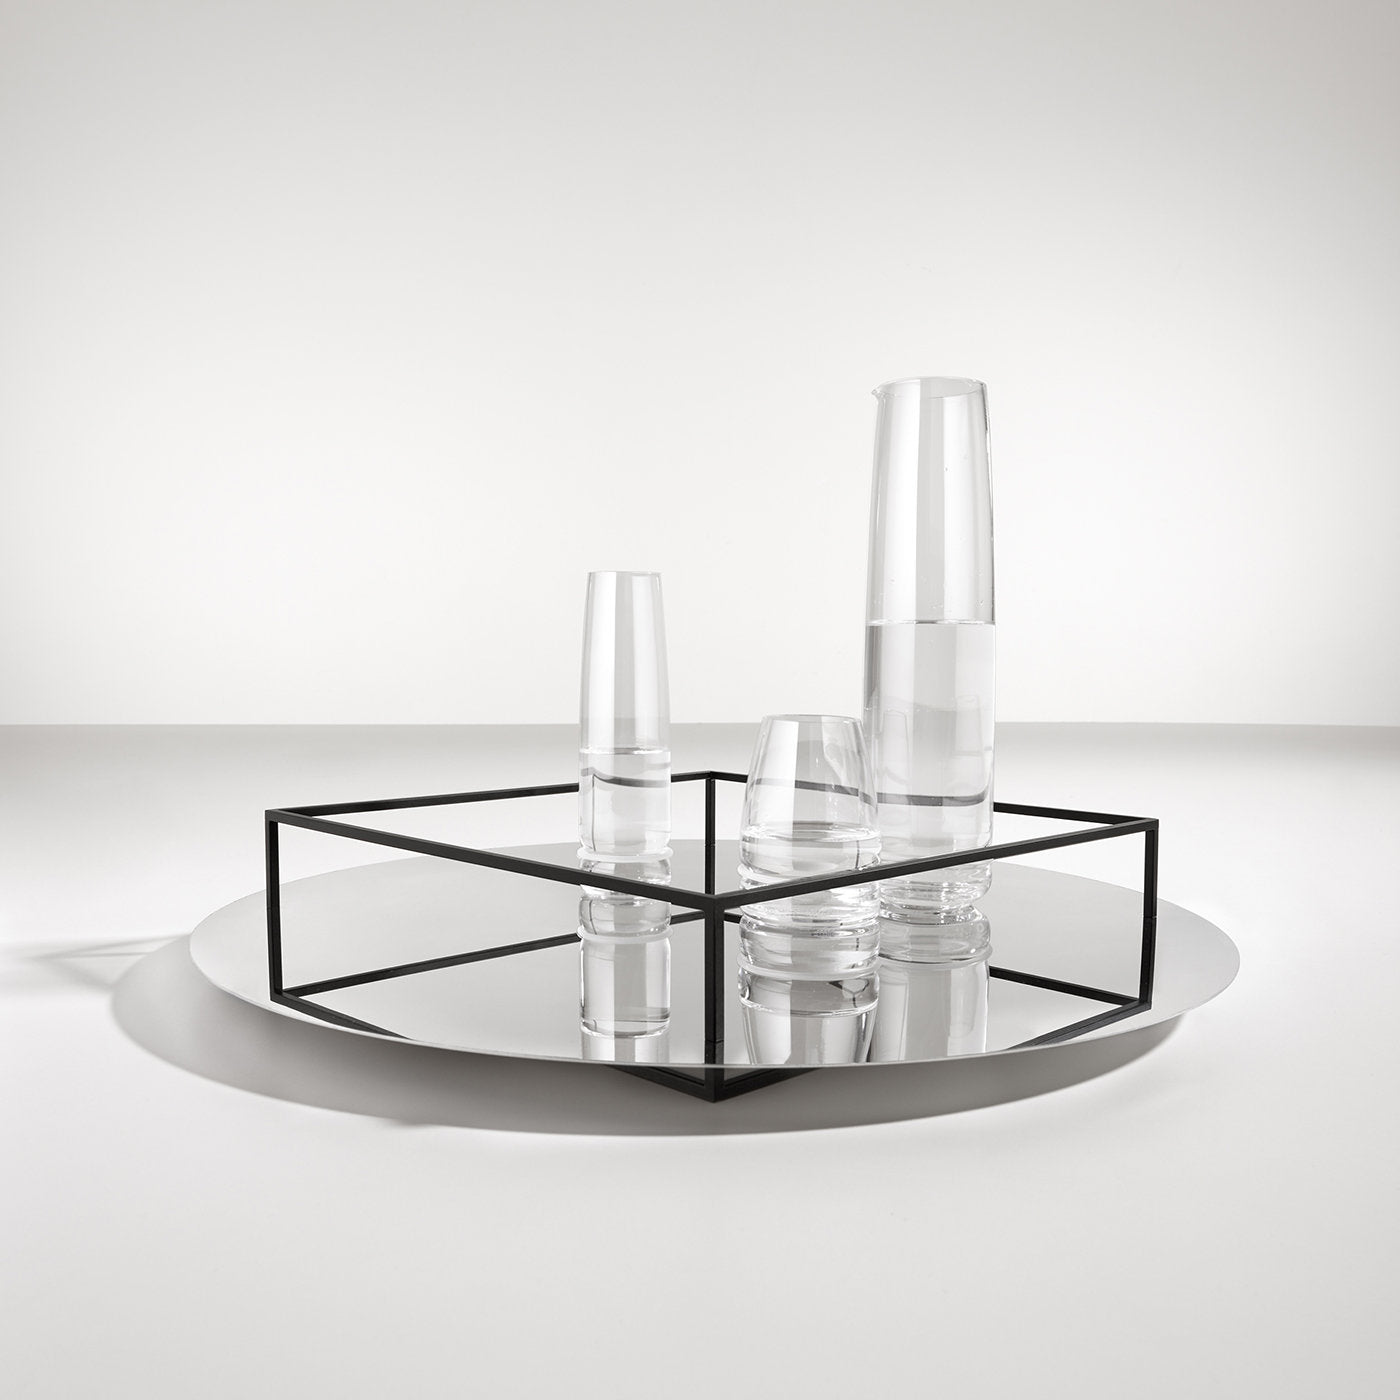 Surface + Border N. 1 Black Fruit Tray by Ron Gilad  - Alternative view 2